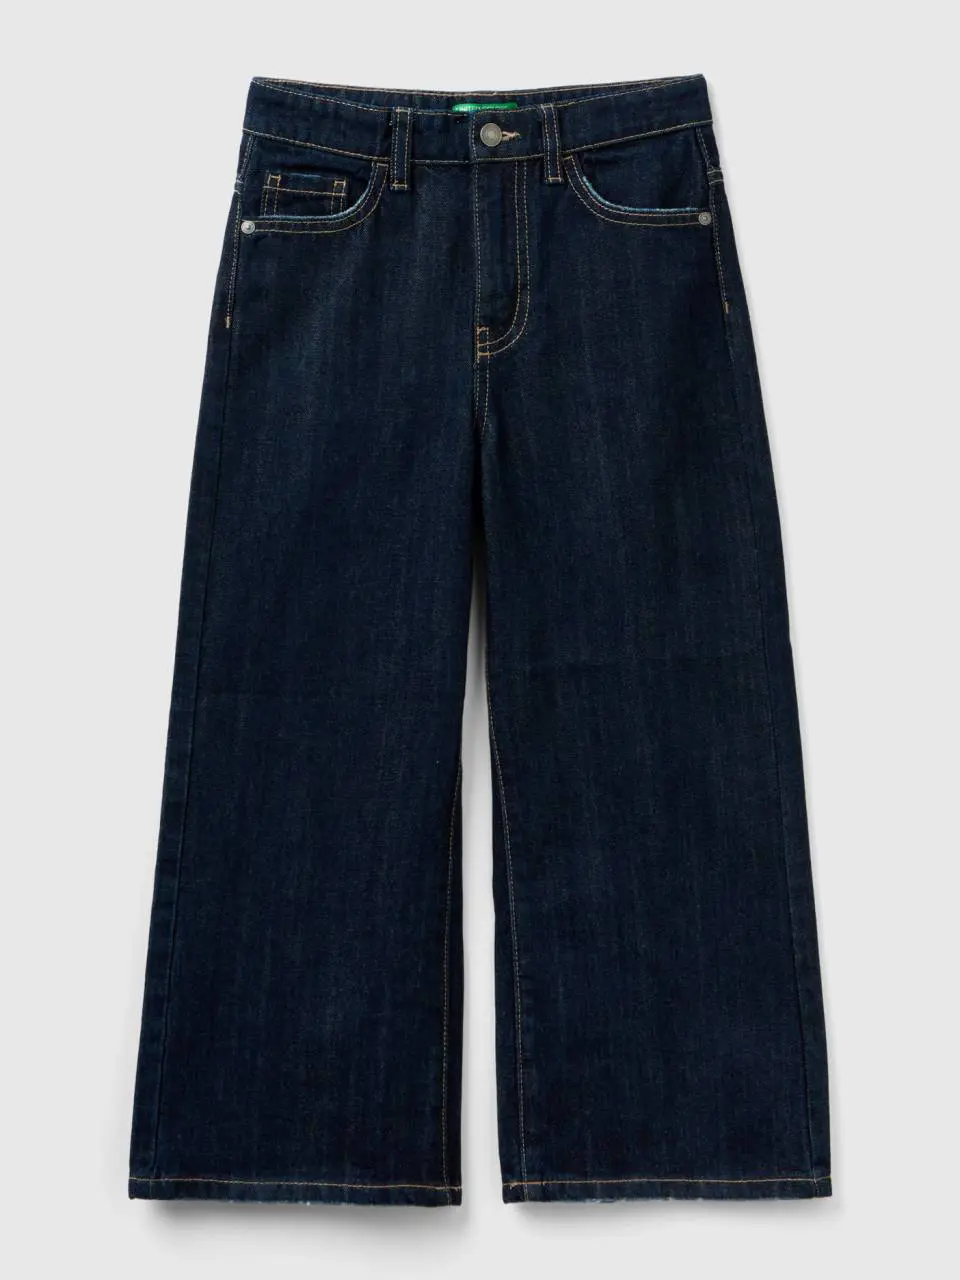 Benetton wide fit high-waisted jeans. 1